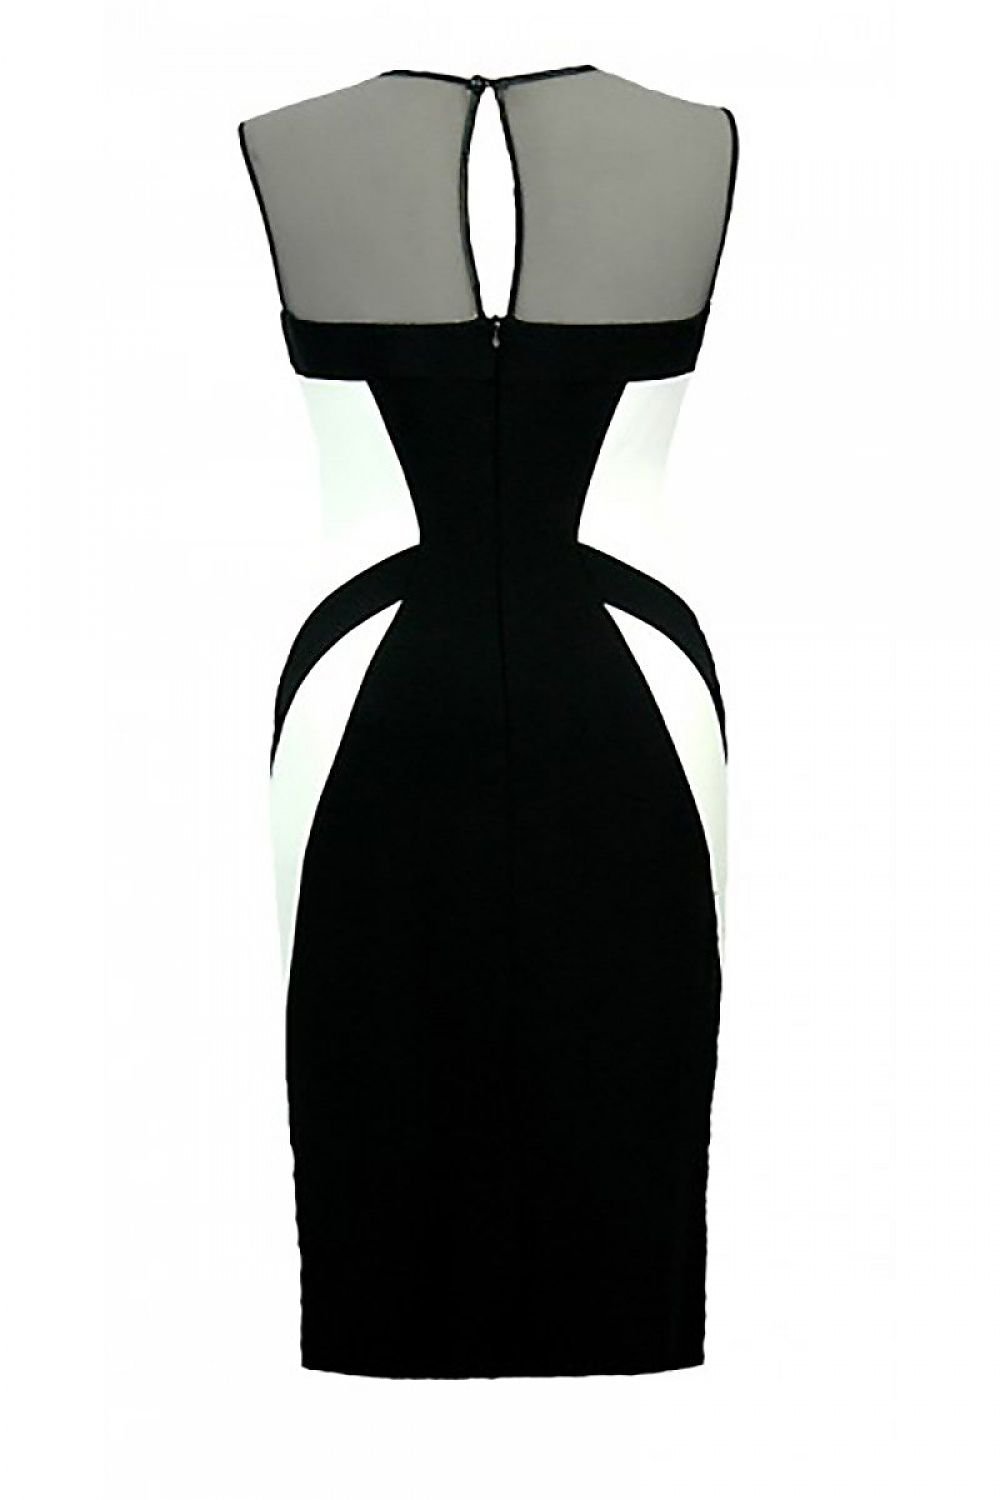 Jersa's Chic Hourglass Illusion Cocktail Dress with V-Neckline